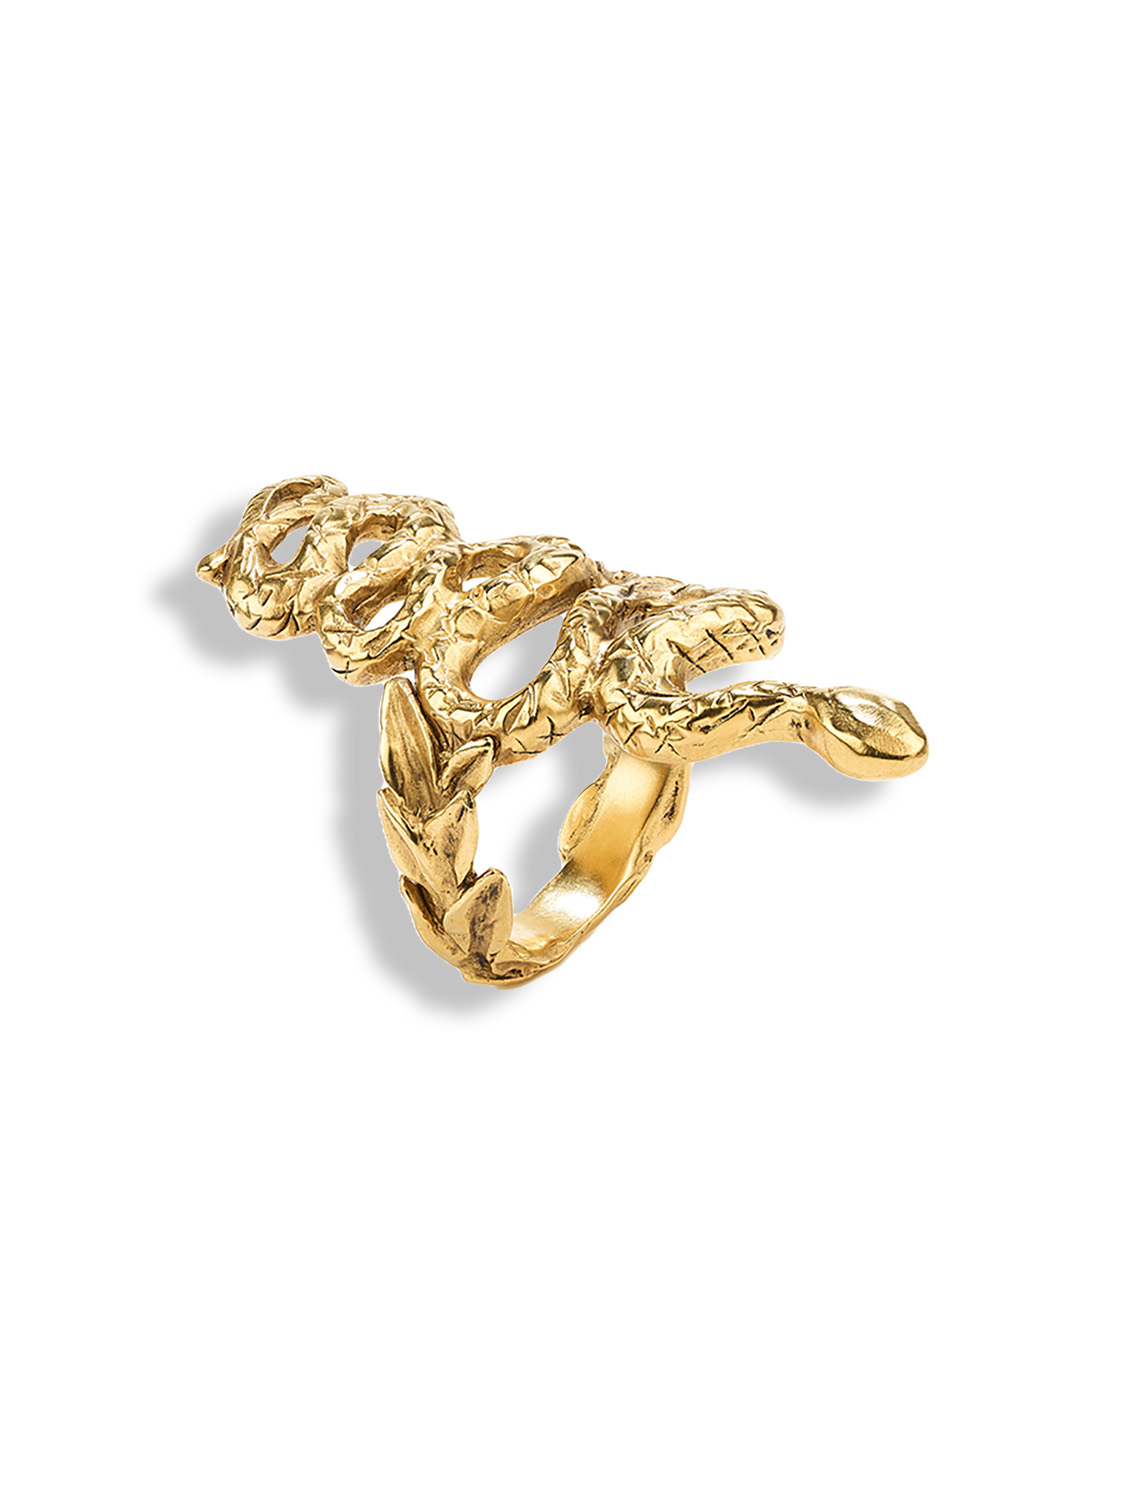 Carthage serpent ring - Ring with snake motif